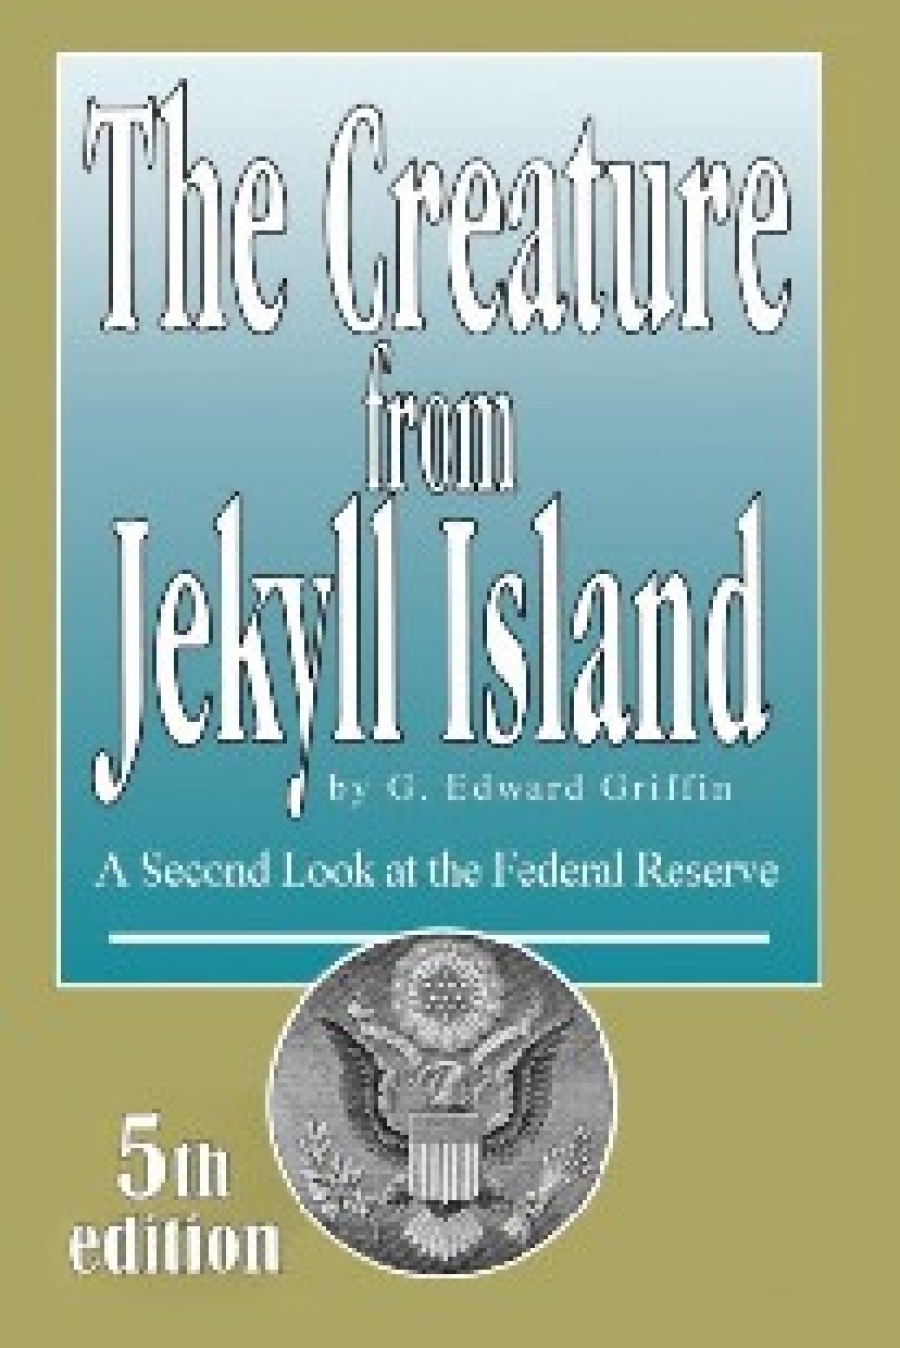 Griffin, G. Edward Creature from jekyll island 